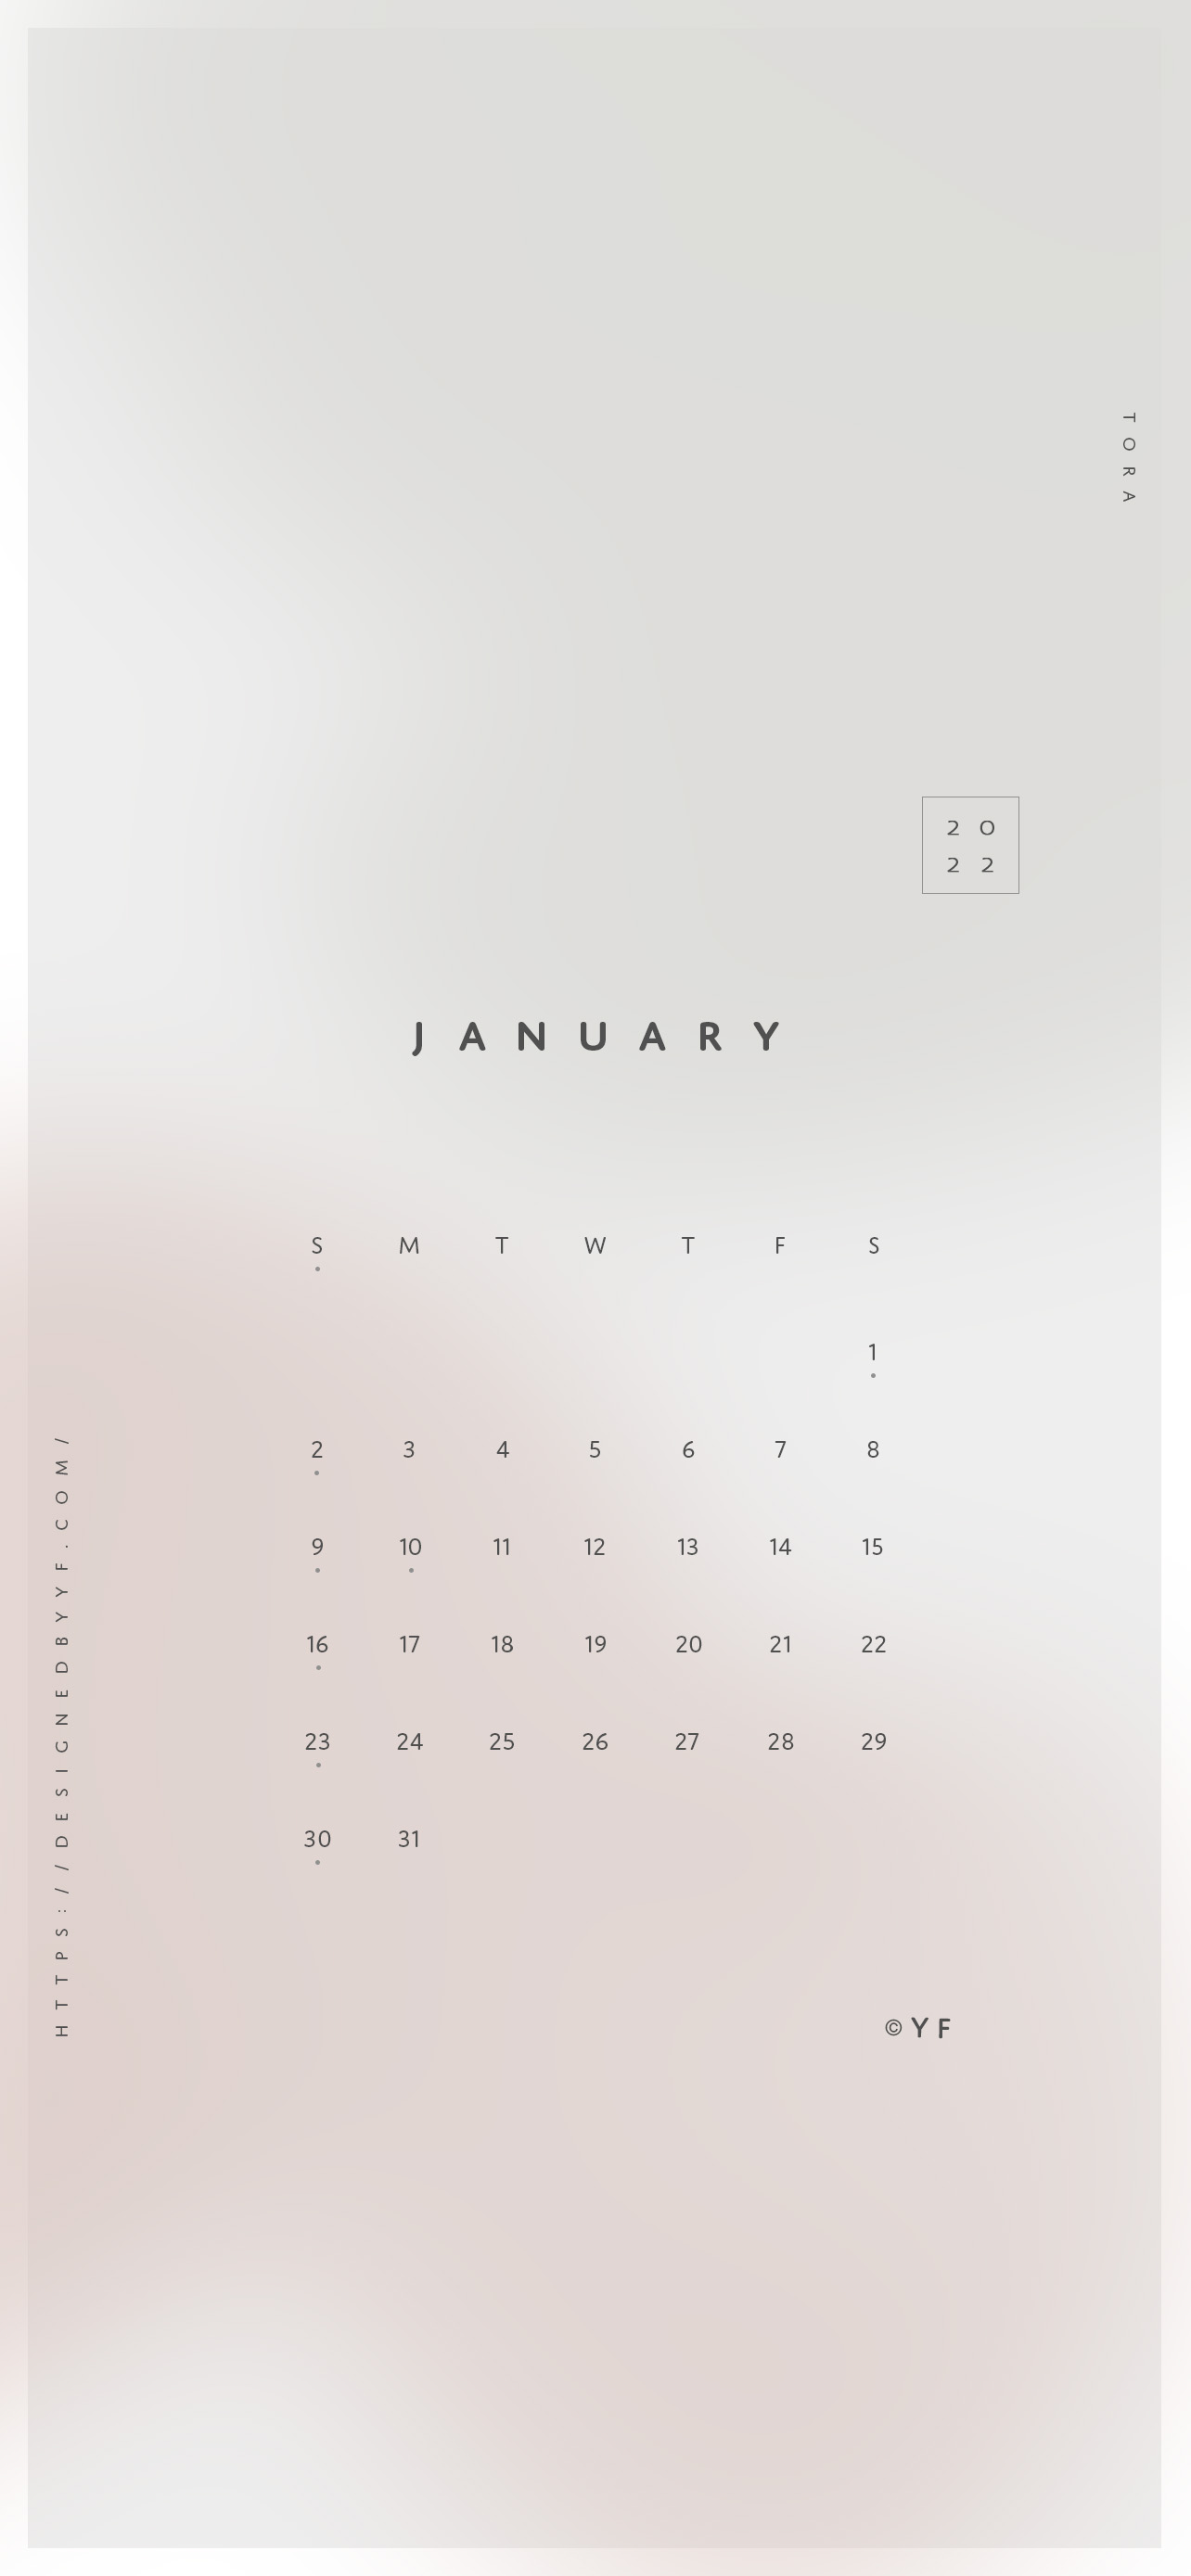 January 22 Calendar Wallpaper For The Iphone Design By Yf